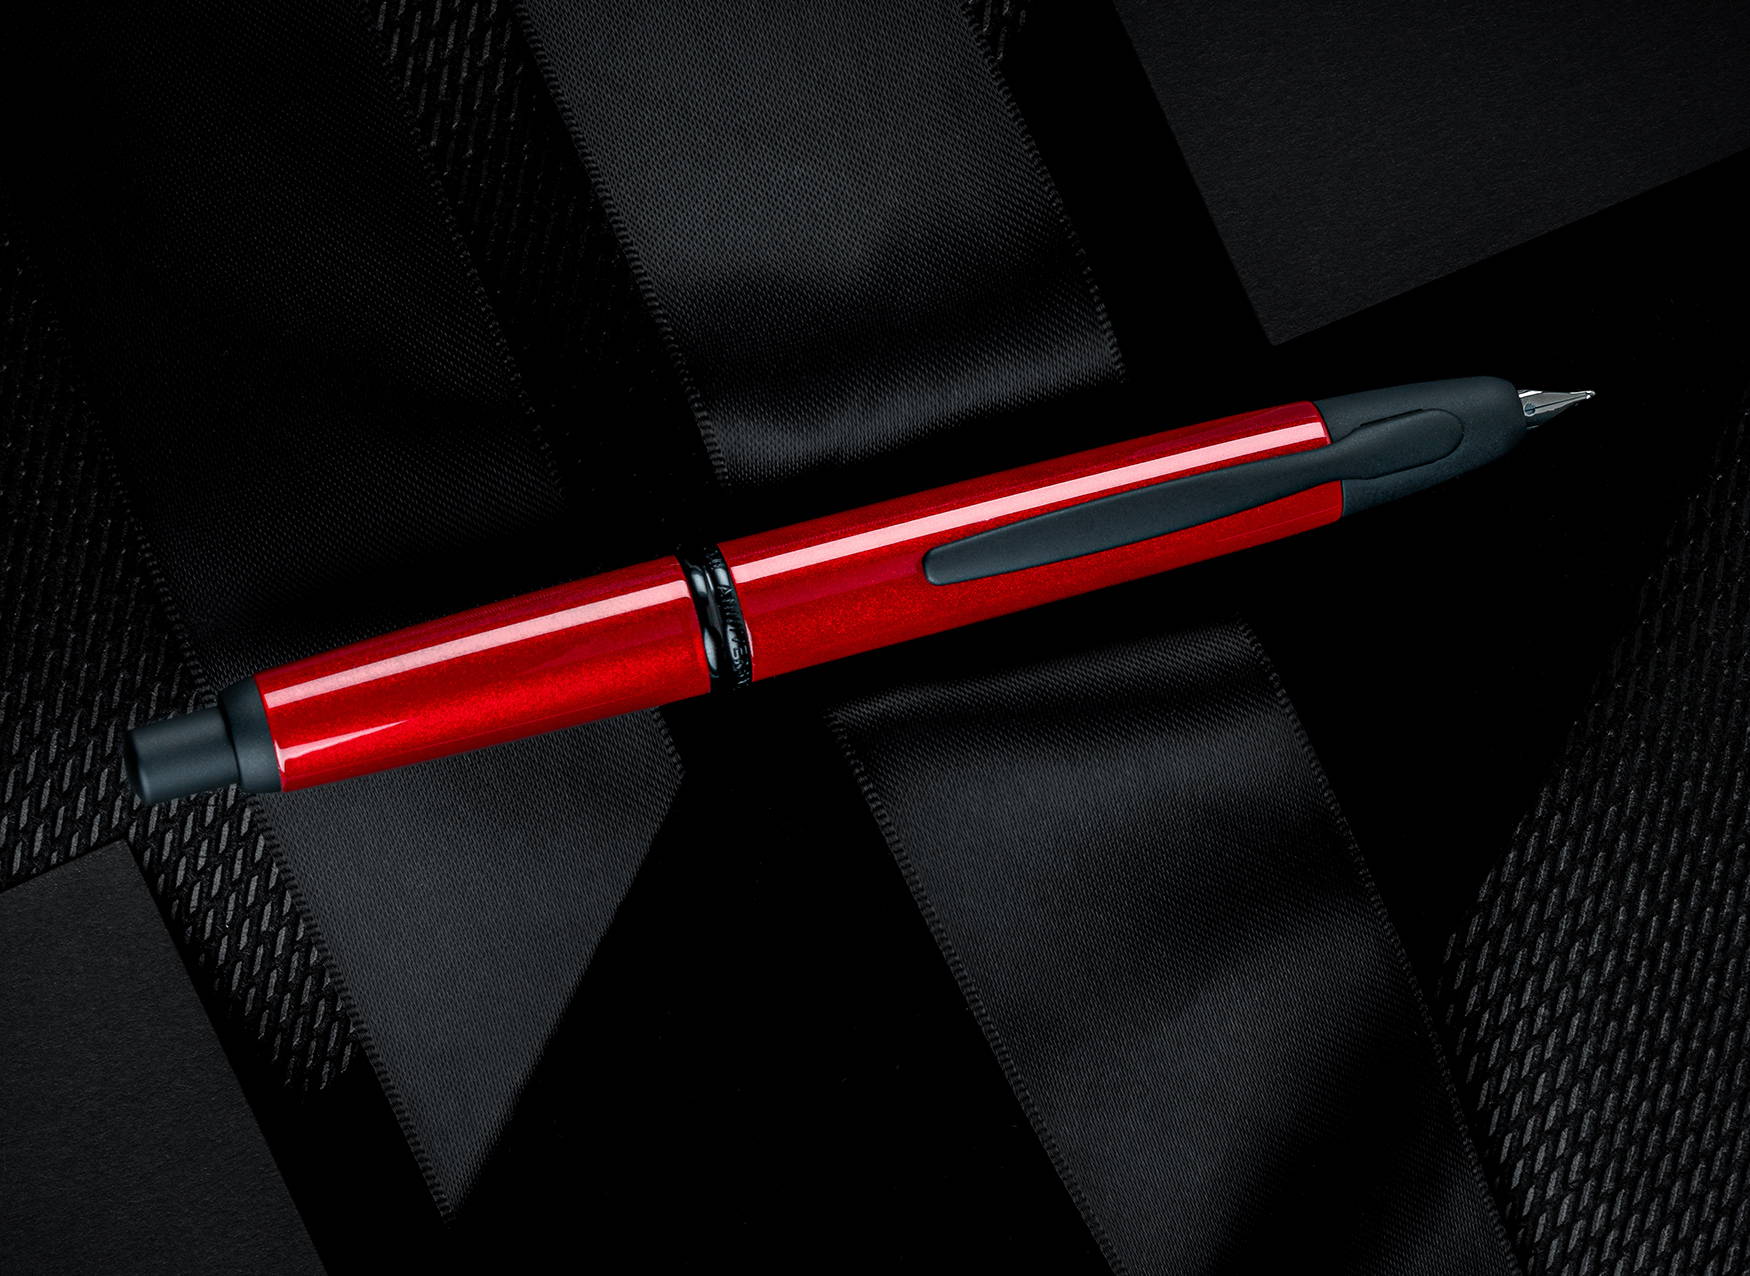 The Pen Enthusiast: Black n' Red Notebook Review